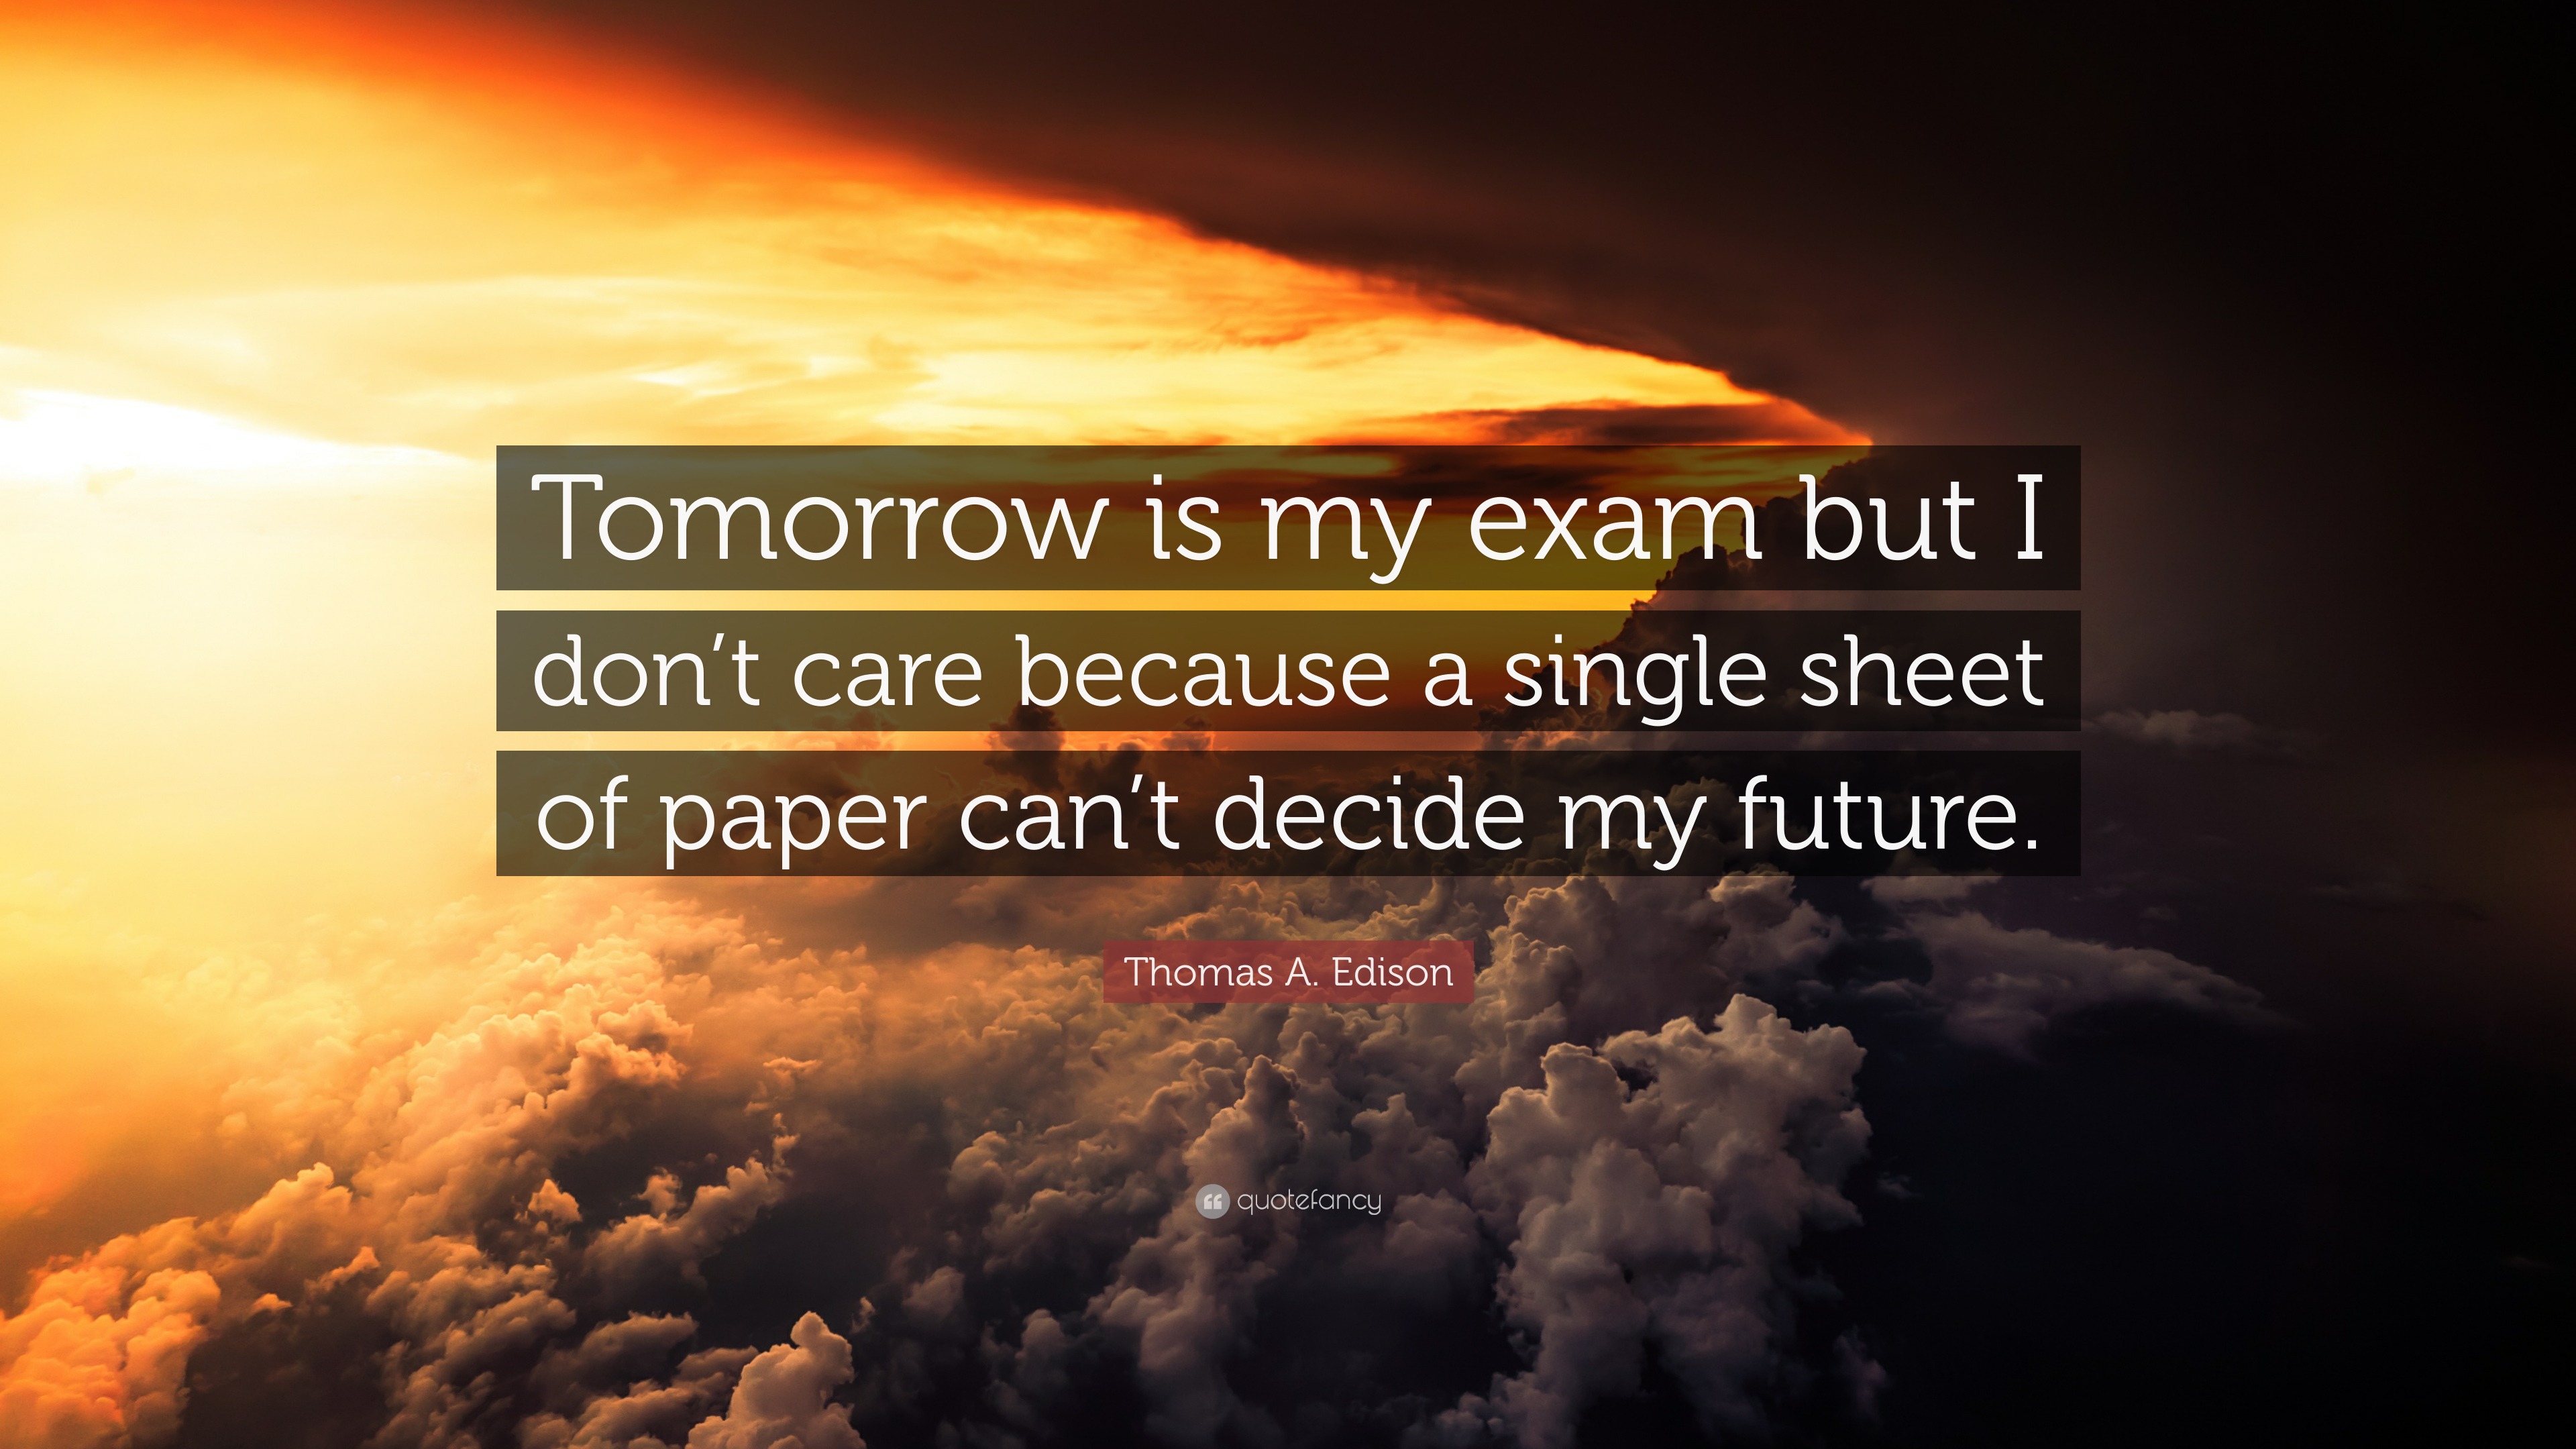 Thomas A. Edison Quote: “Tomorrow is my exam but I don’t care because a